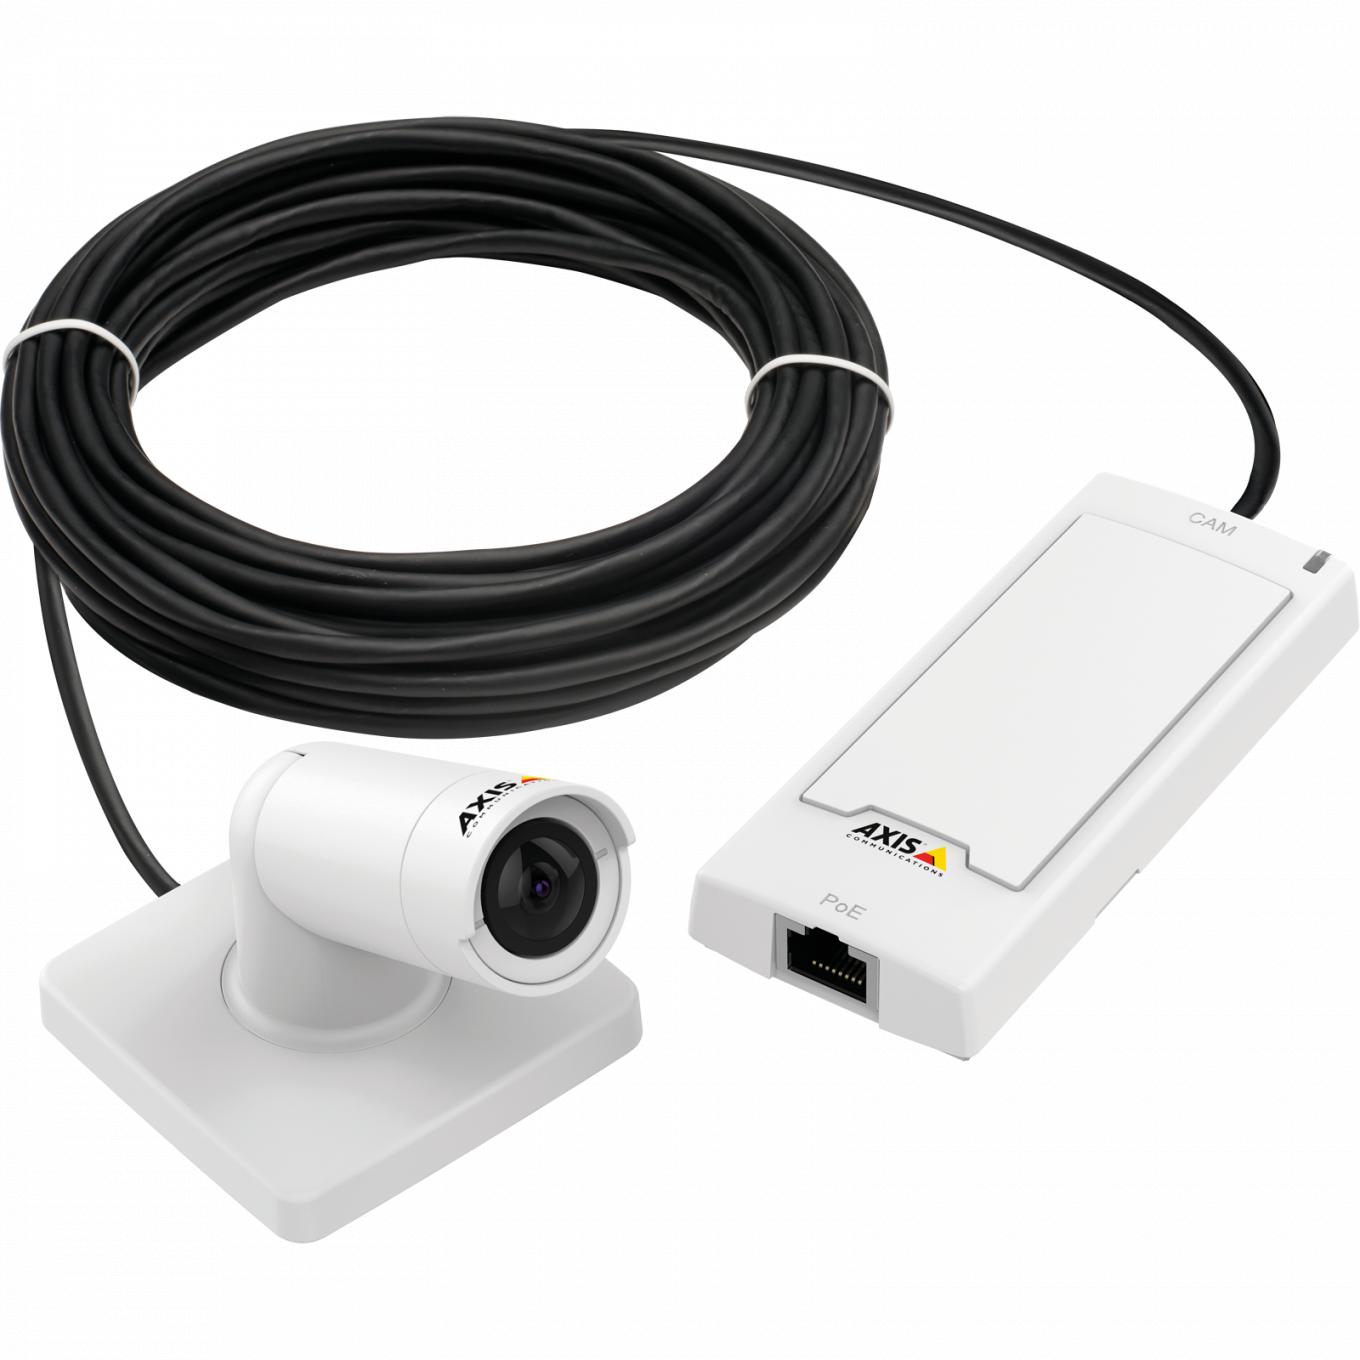 AXIS P1254 Network camera with main unit and cable